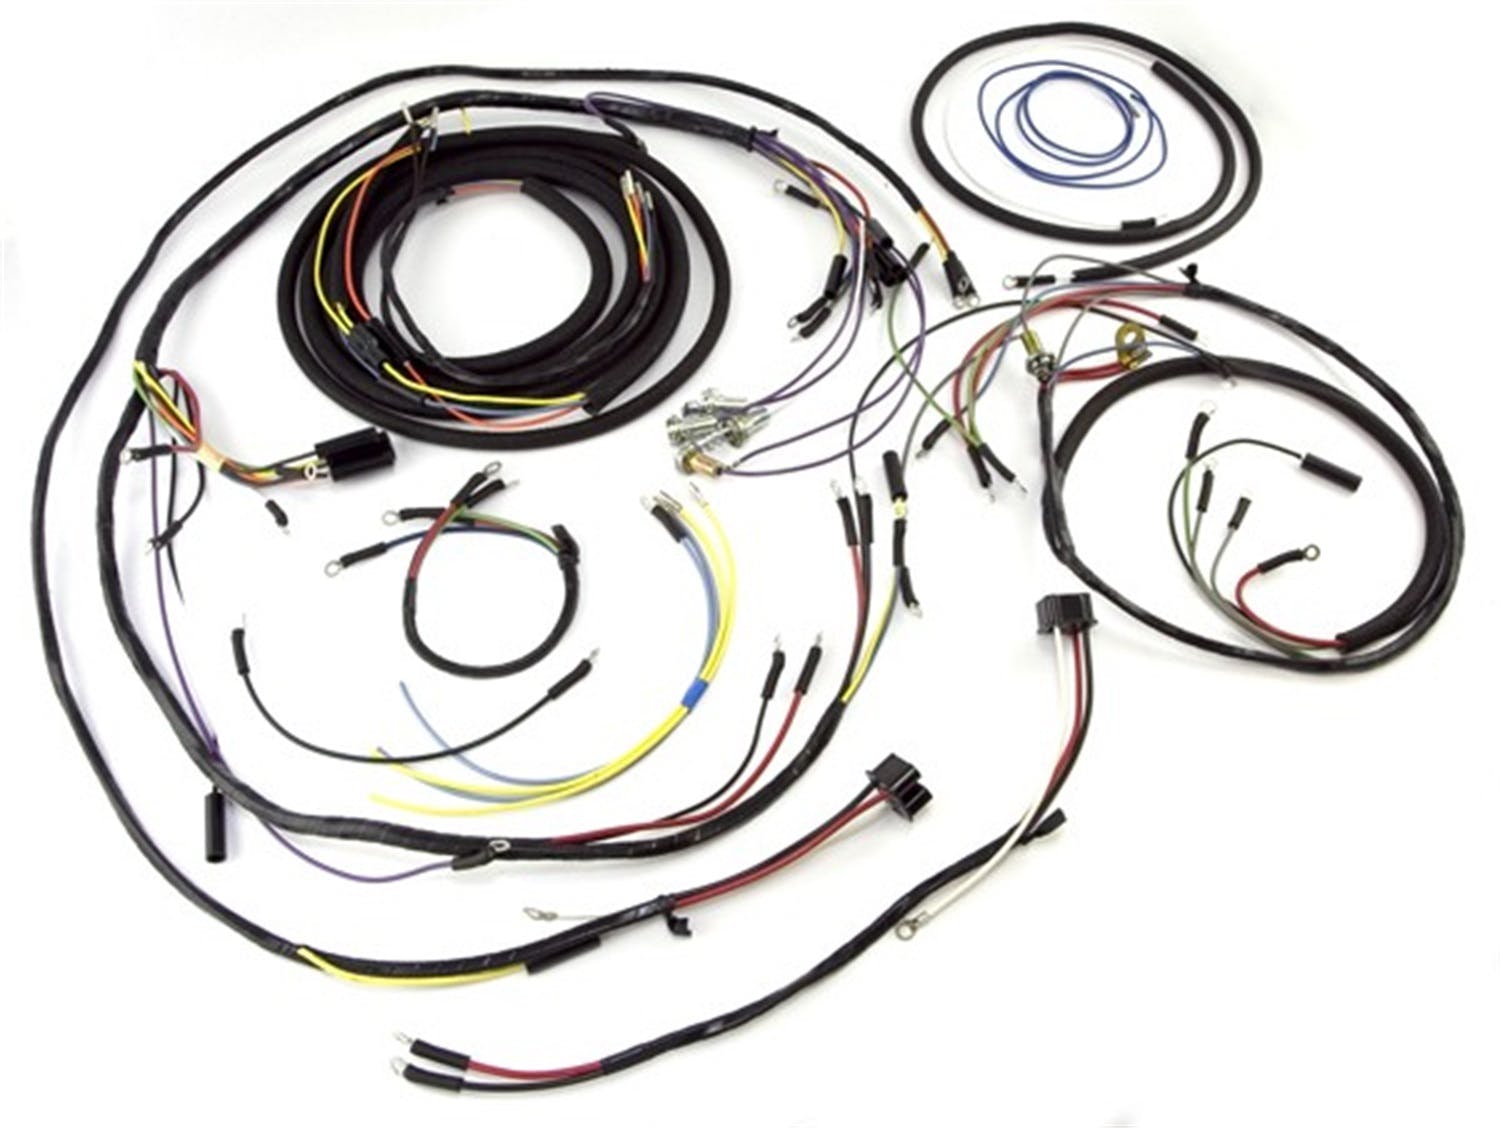 Omix-ADA 17201.08 Compete Wiring Harness with Plastic Wire Cover